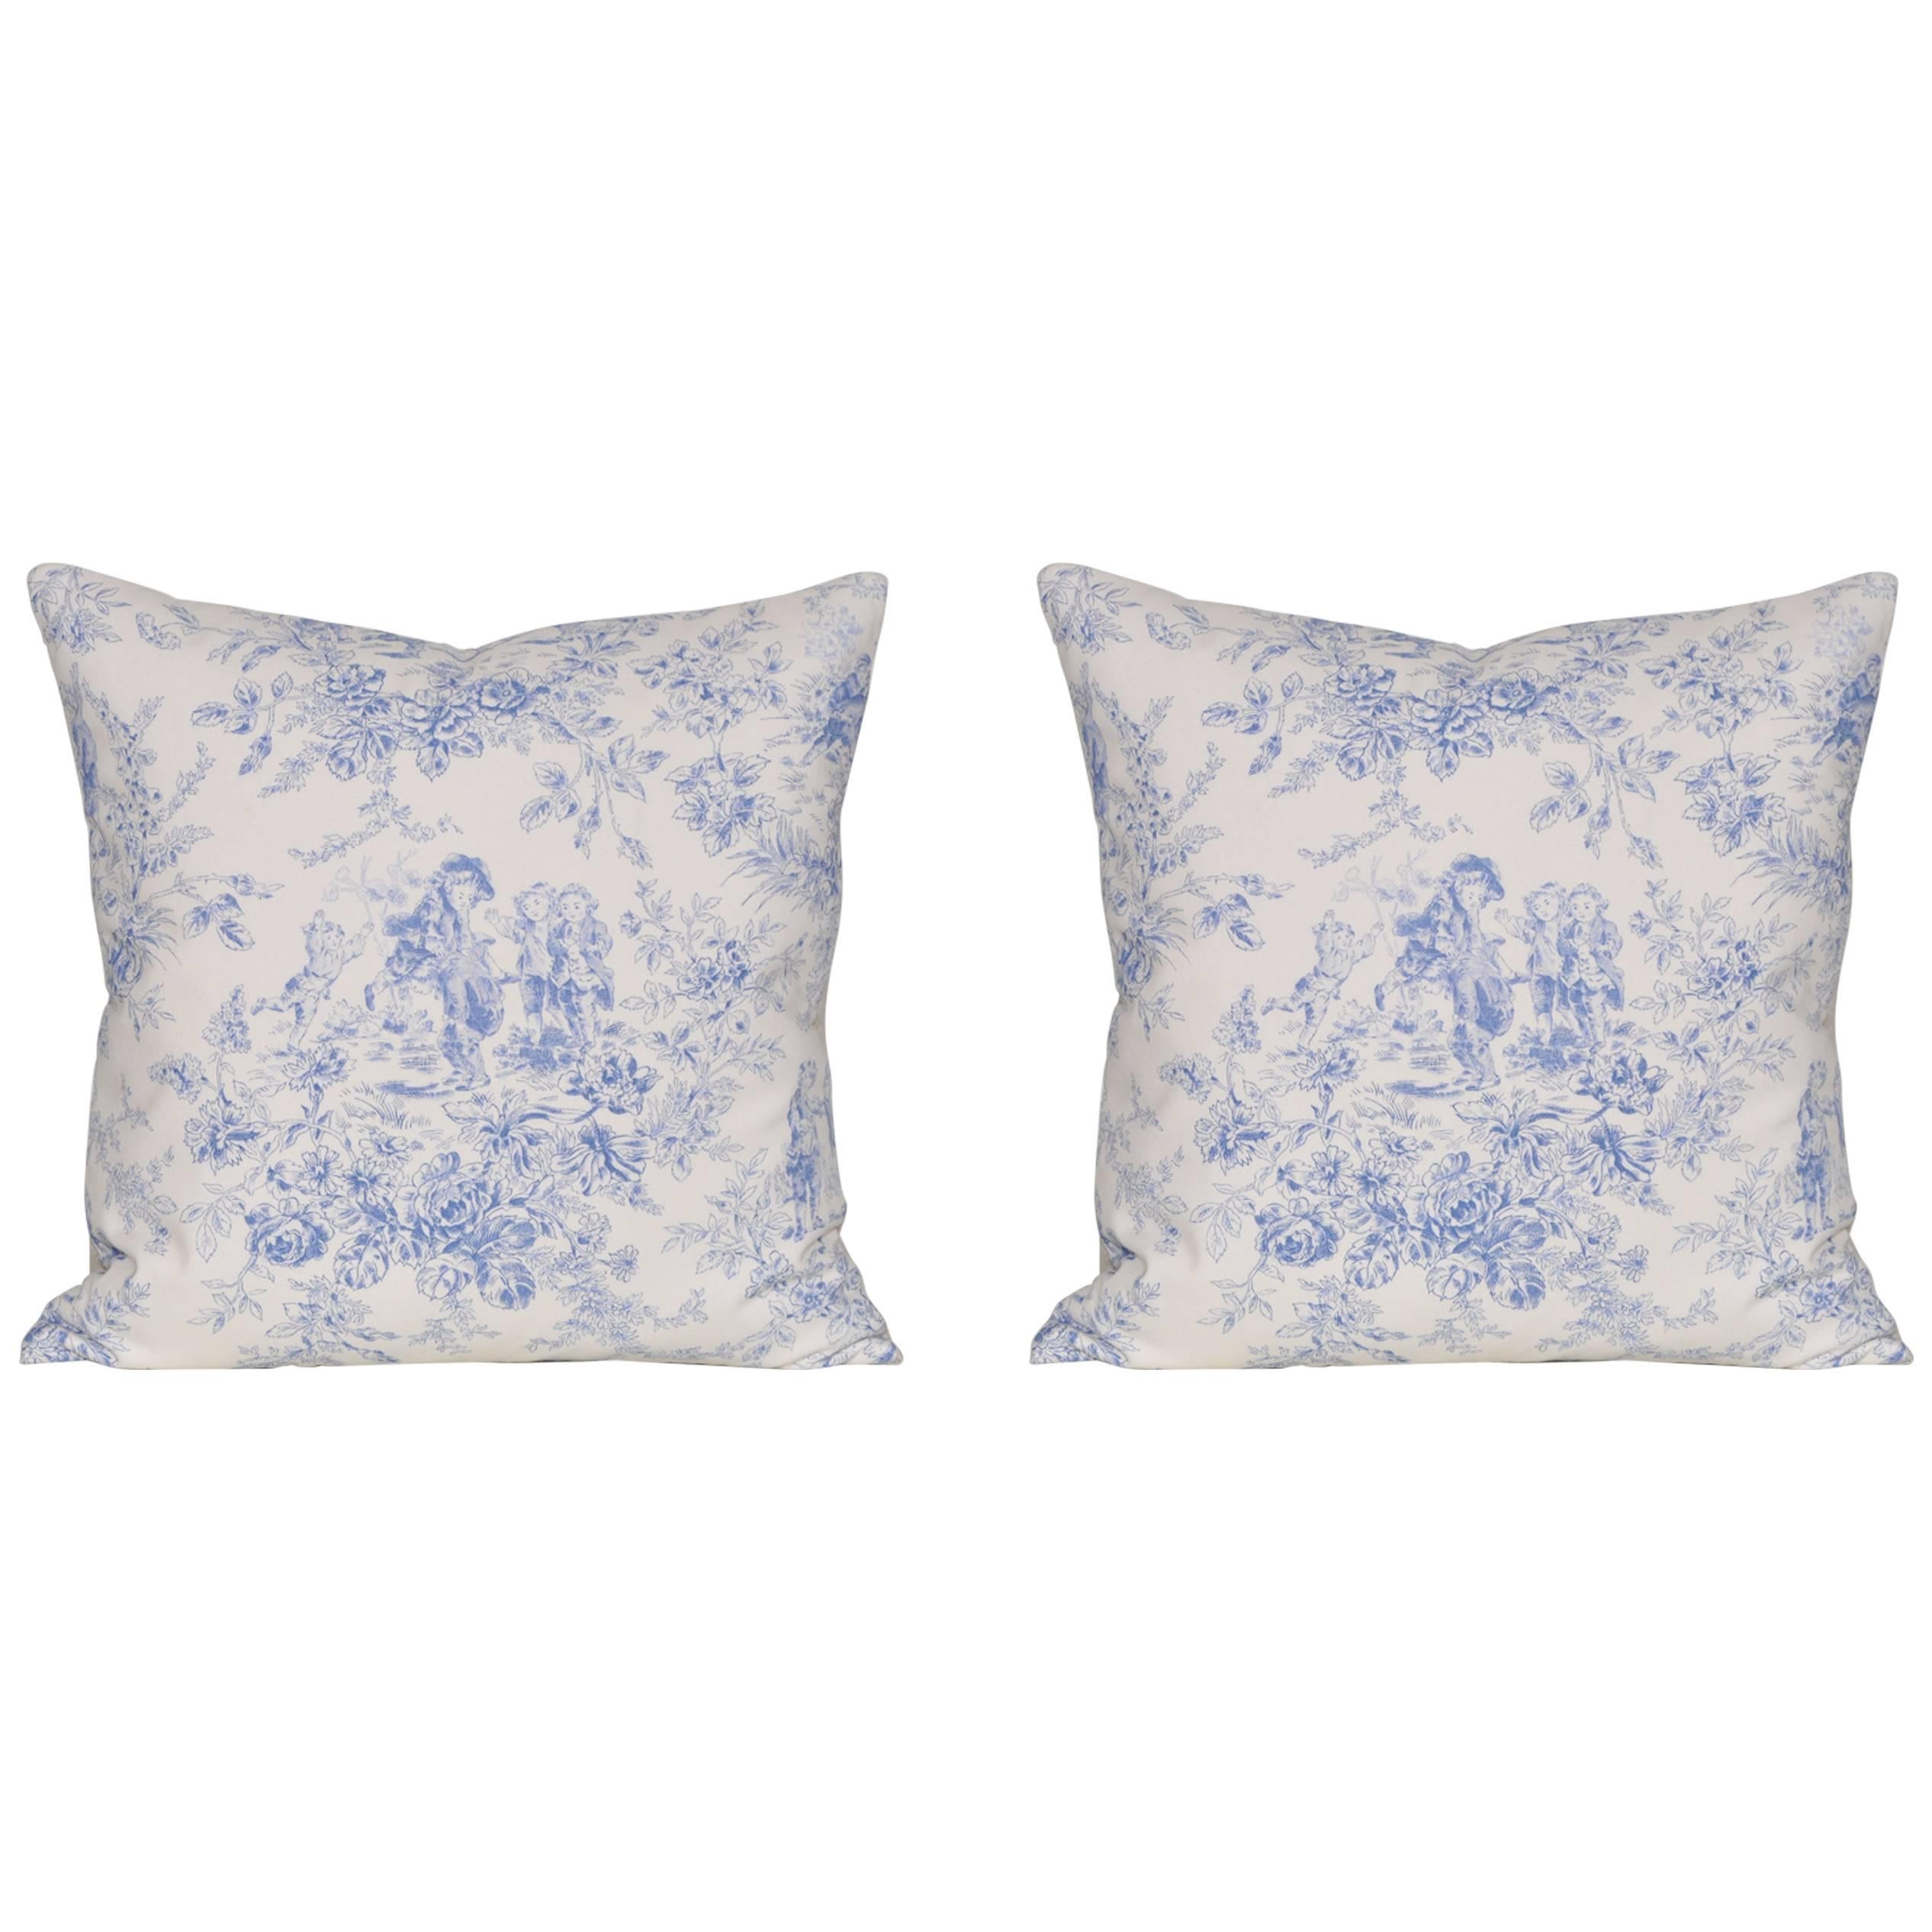 Pair of Vintage French Blue 'Toile De Jouy' Cushions Pillows with in Irish Linen For Sale